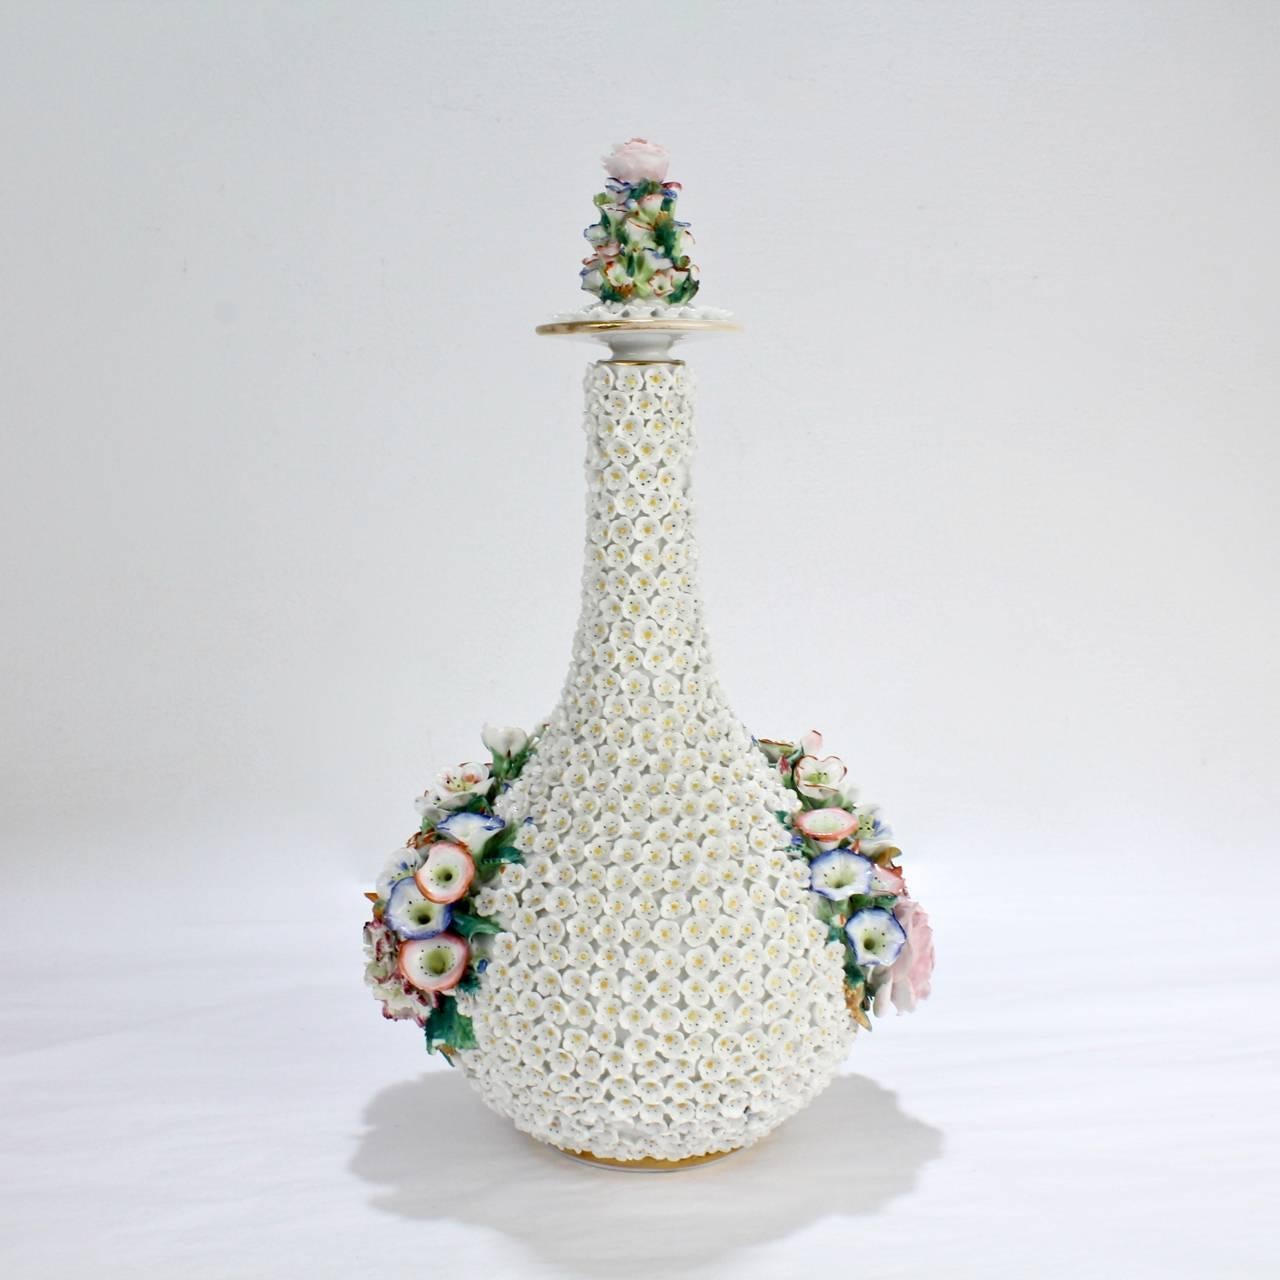 A rare, antique French porcelain bottle or decanter by Jacob Petit.

With typical Meissen style 